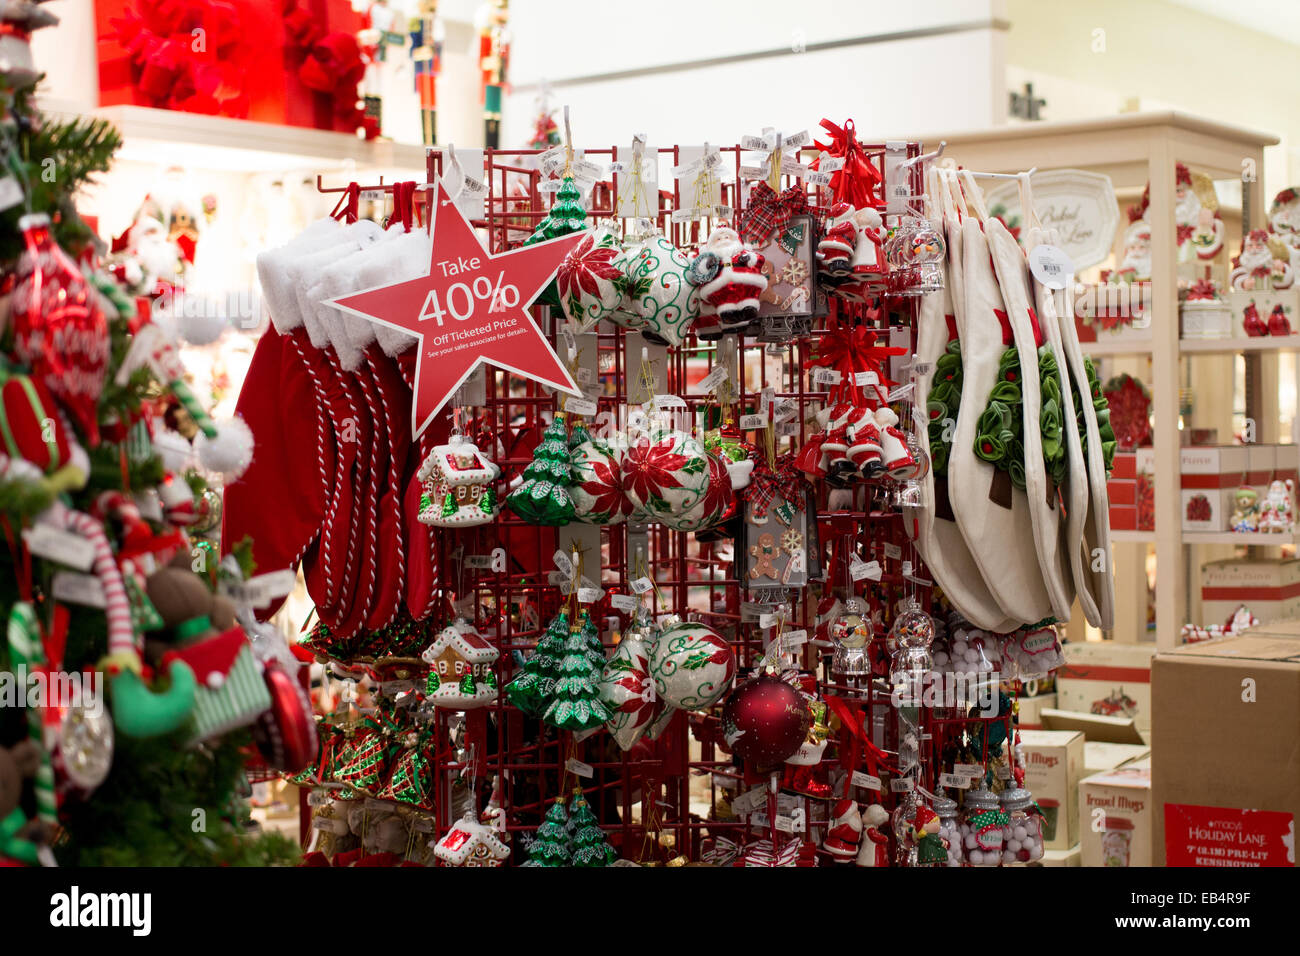 Christmas Tree decorations at Macy's department store in The Florida ...